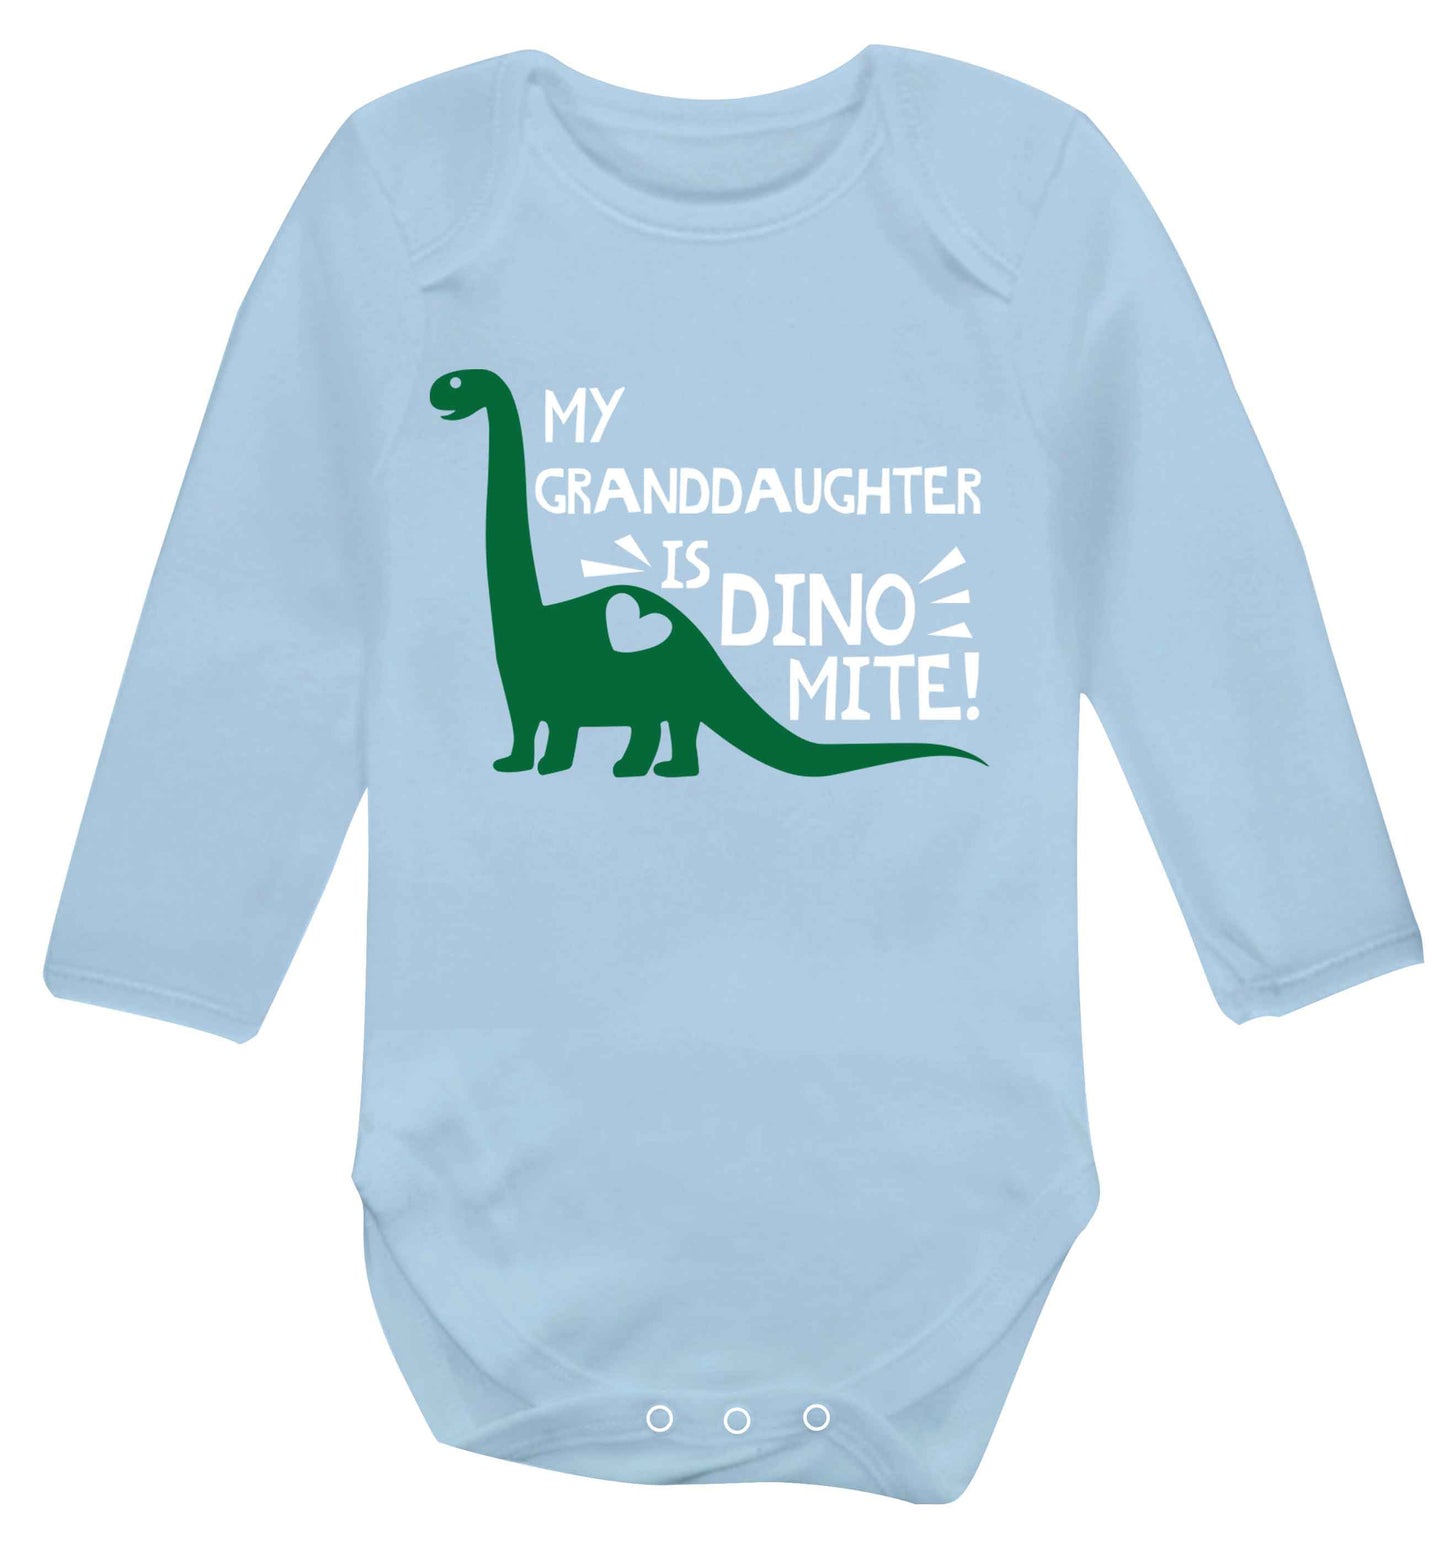 My granddaughter is dinomite! Baby Vest long sleeved pale blue 6-12 months